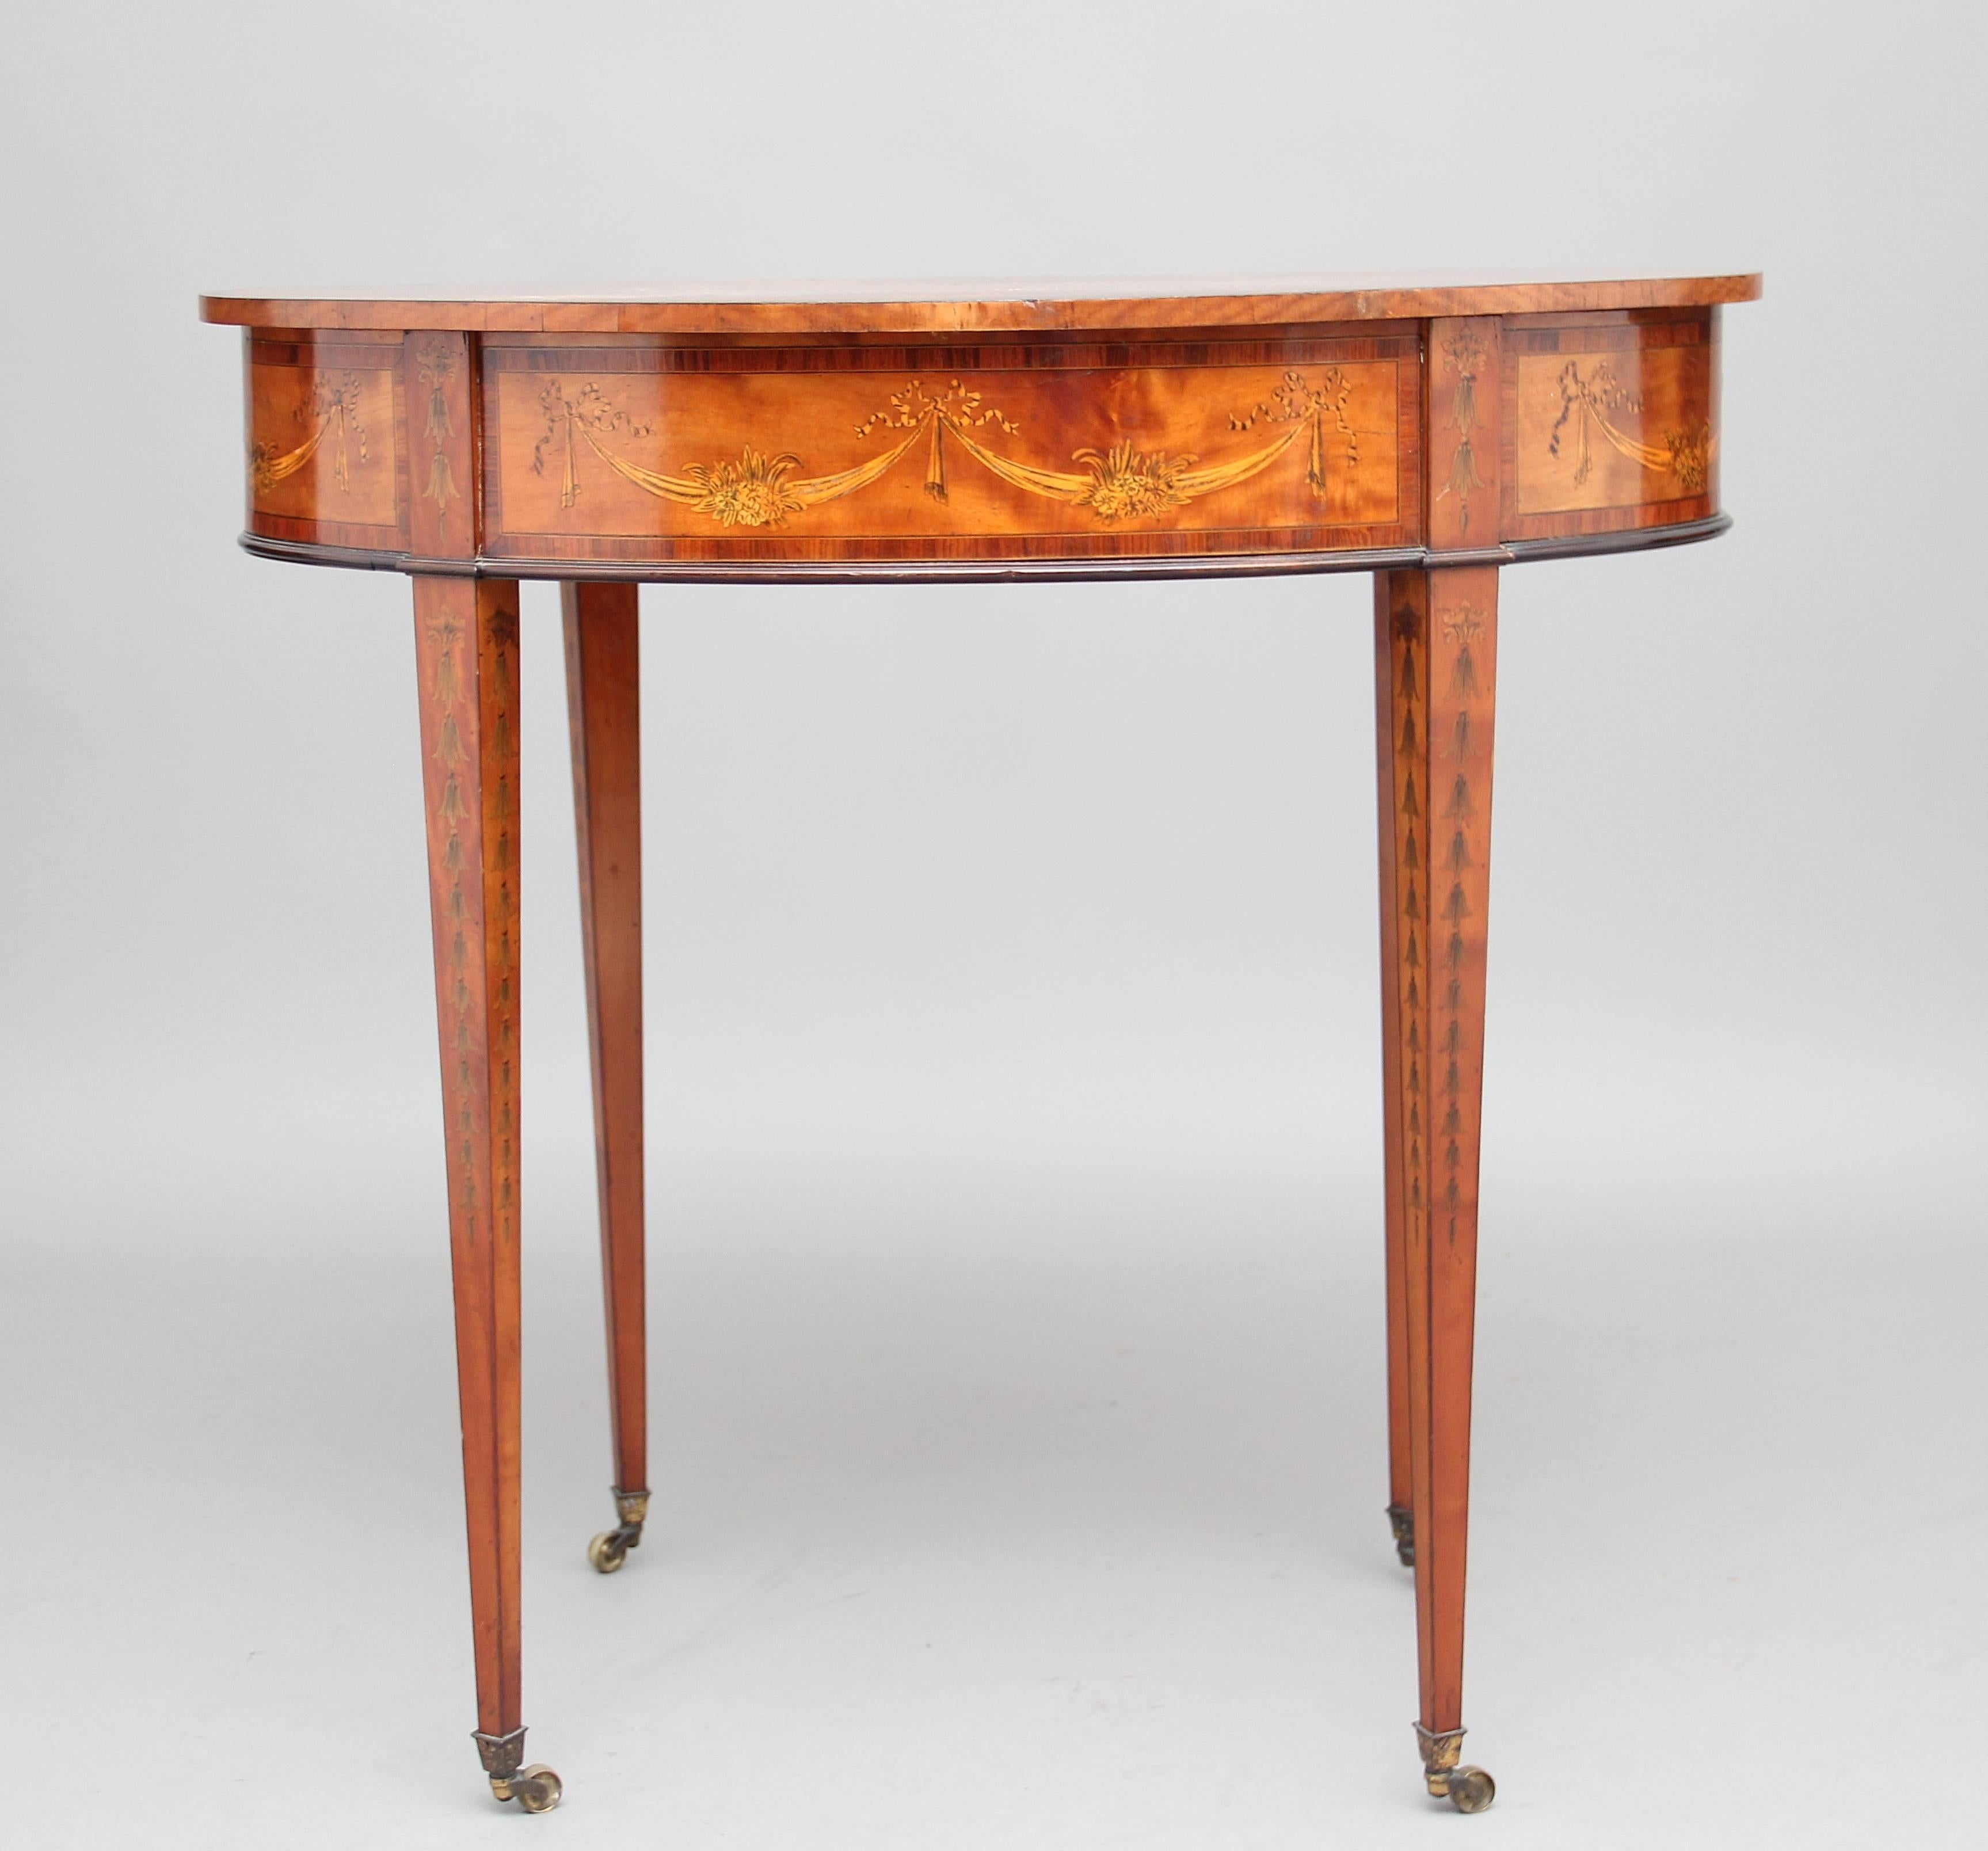 Late 19th Century 19th Century Inlaid Satinwood Centre Table